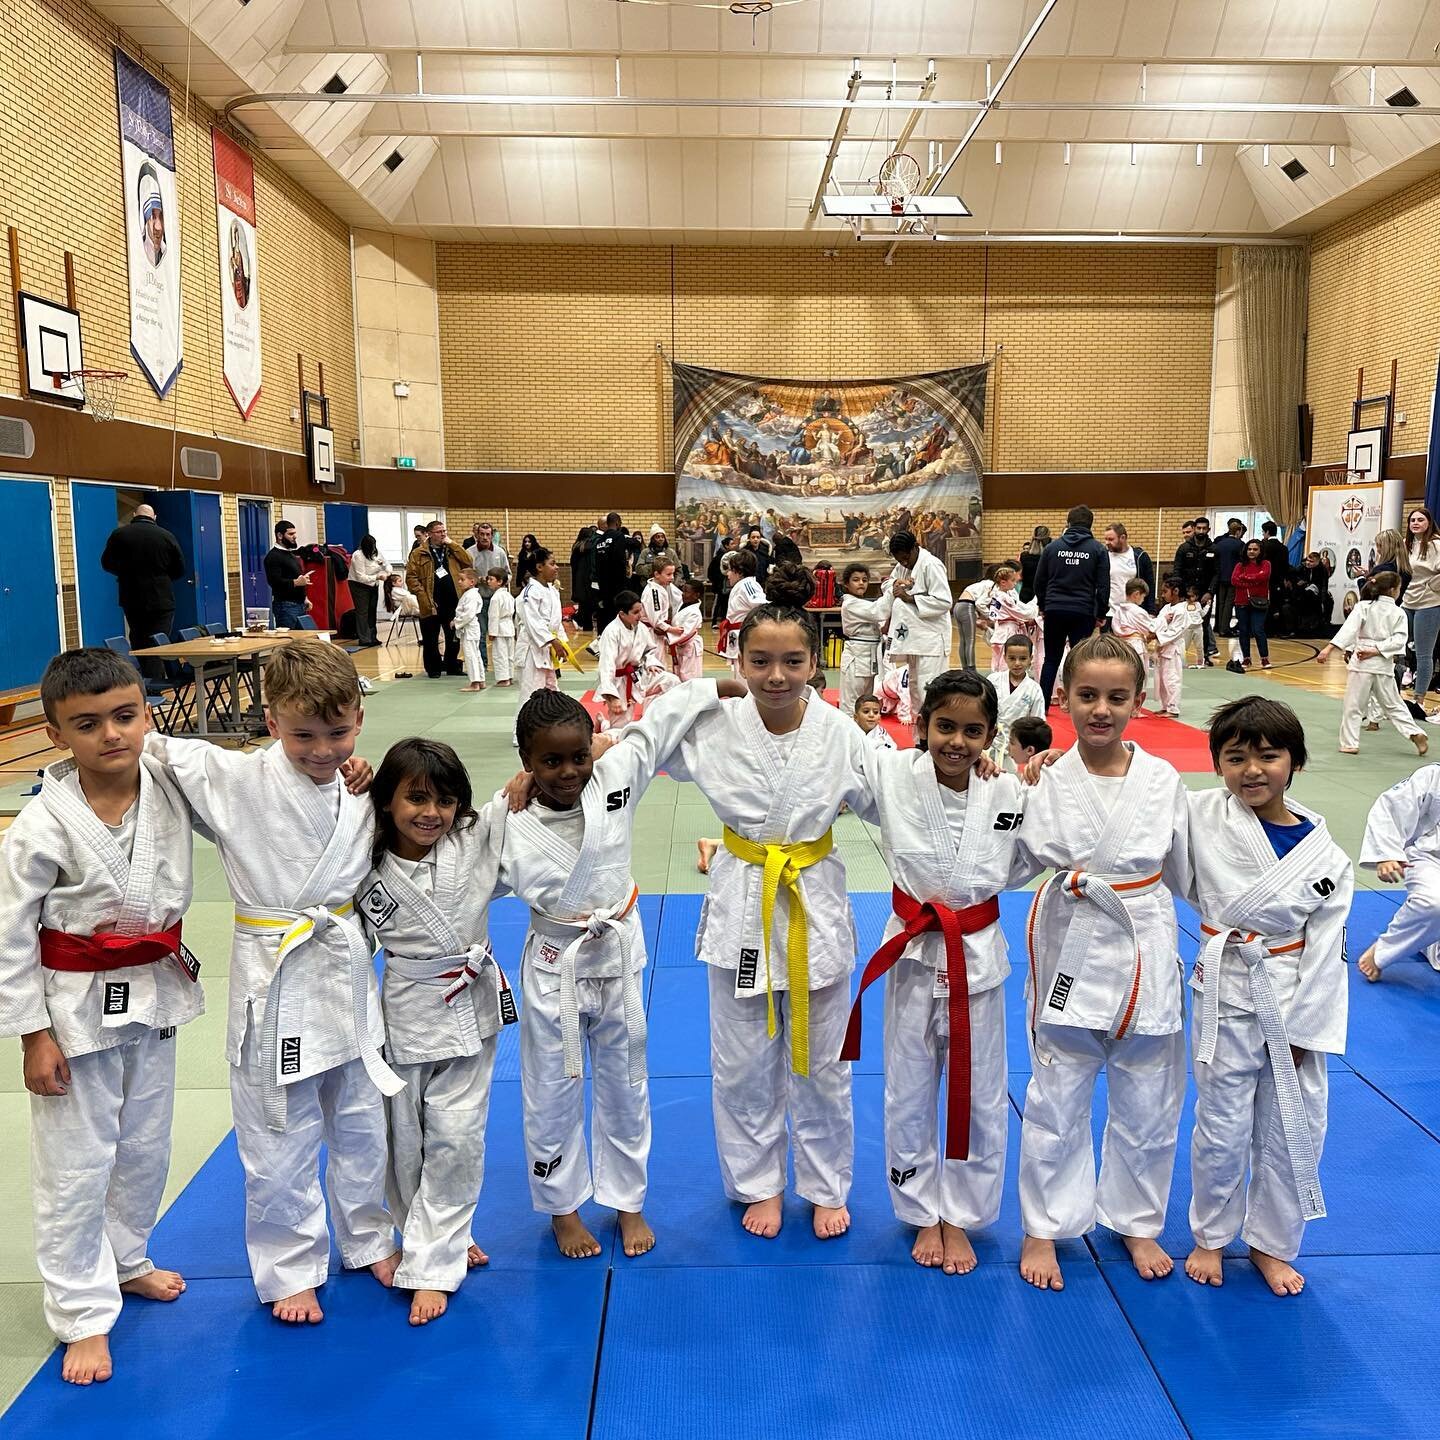 Busy day today with 17 fighting at the East London Development event! Everyone worked so hard, proud of everyone today especially those who did their first competition!! 💪🏻❤️

Matvei 🥇
Noah 🥇
Nukuto 🥇
Zafoorah 🥇
Raj 🥇
Junaid 🥈
Mustafa 🥈
Plat